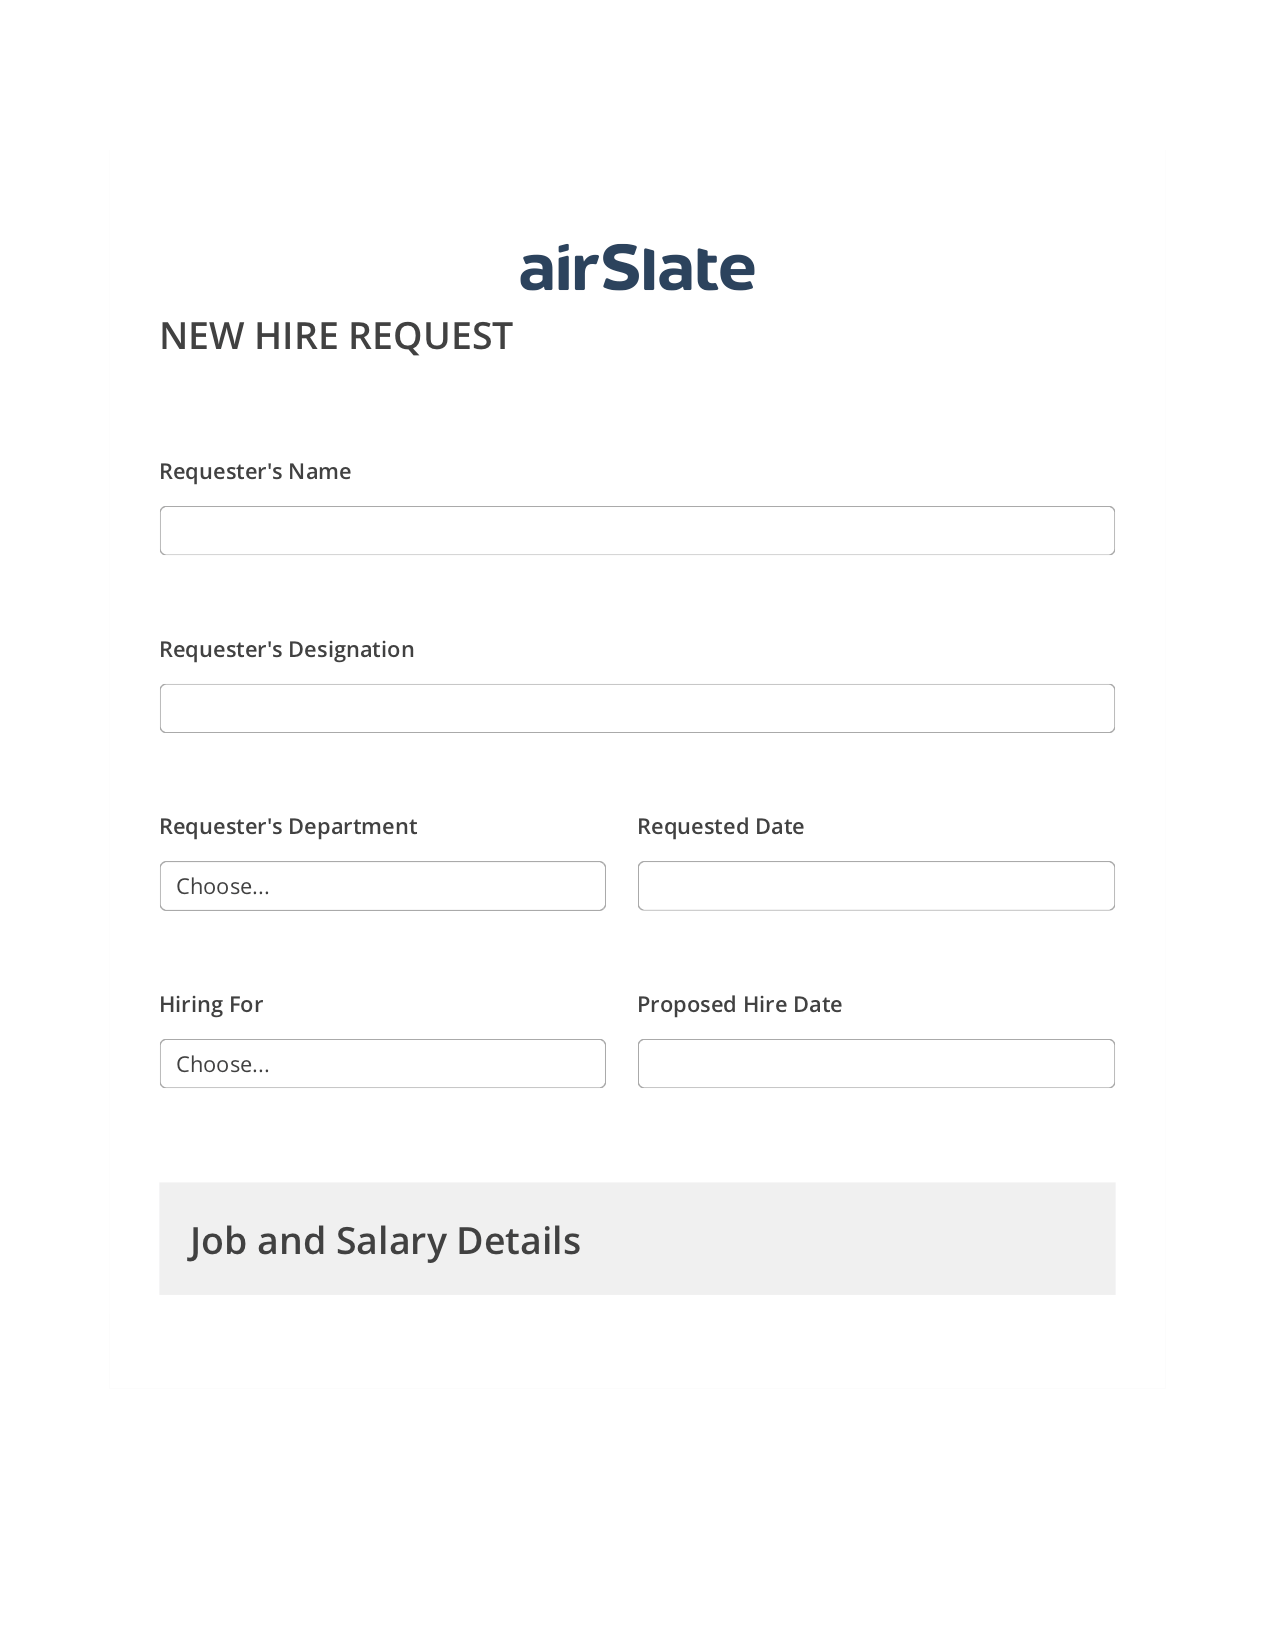 Multirole Hiring Request Workflow Pre-fill from Salesforce Records Bot, Remove Tags From Slate Bot, Export to Excel 365 Bot